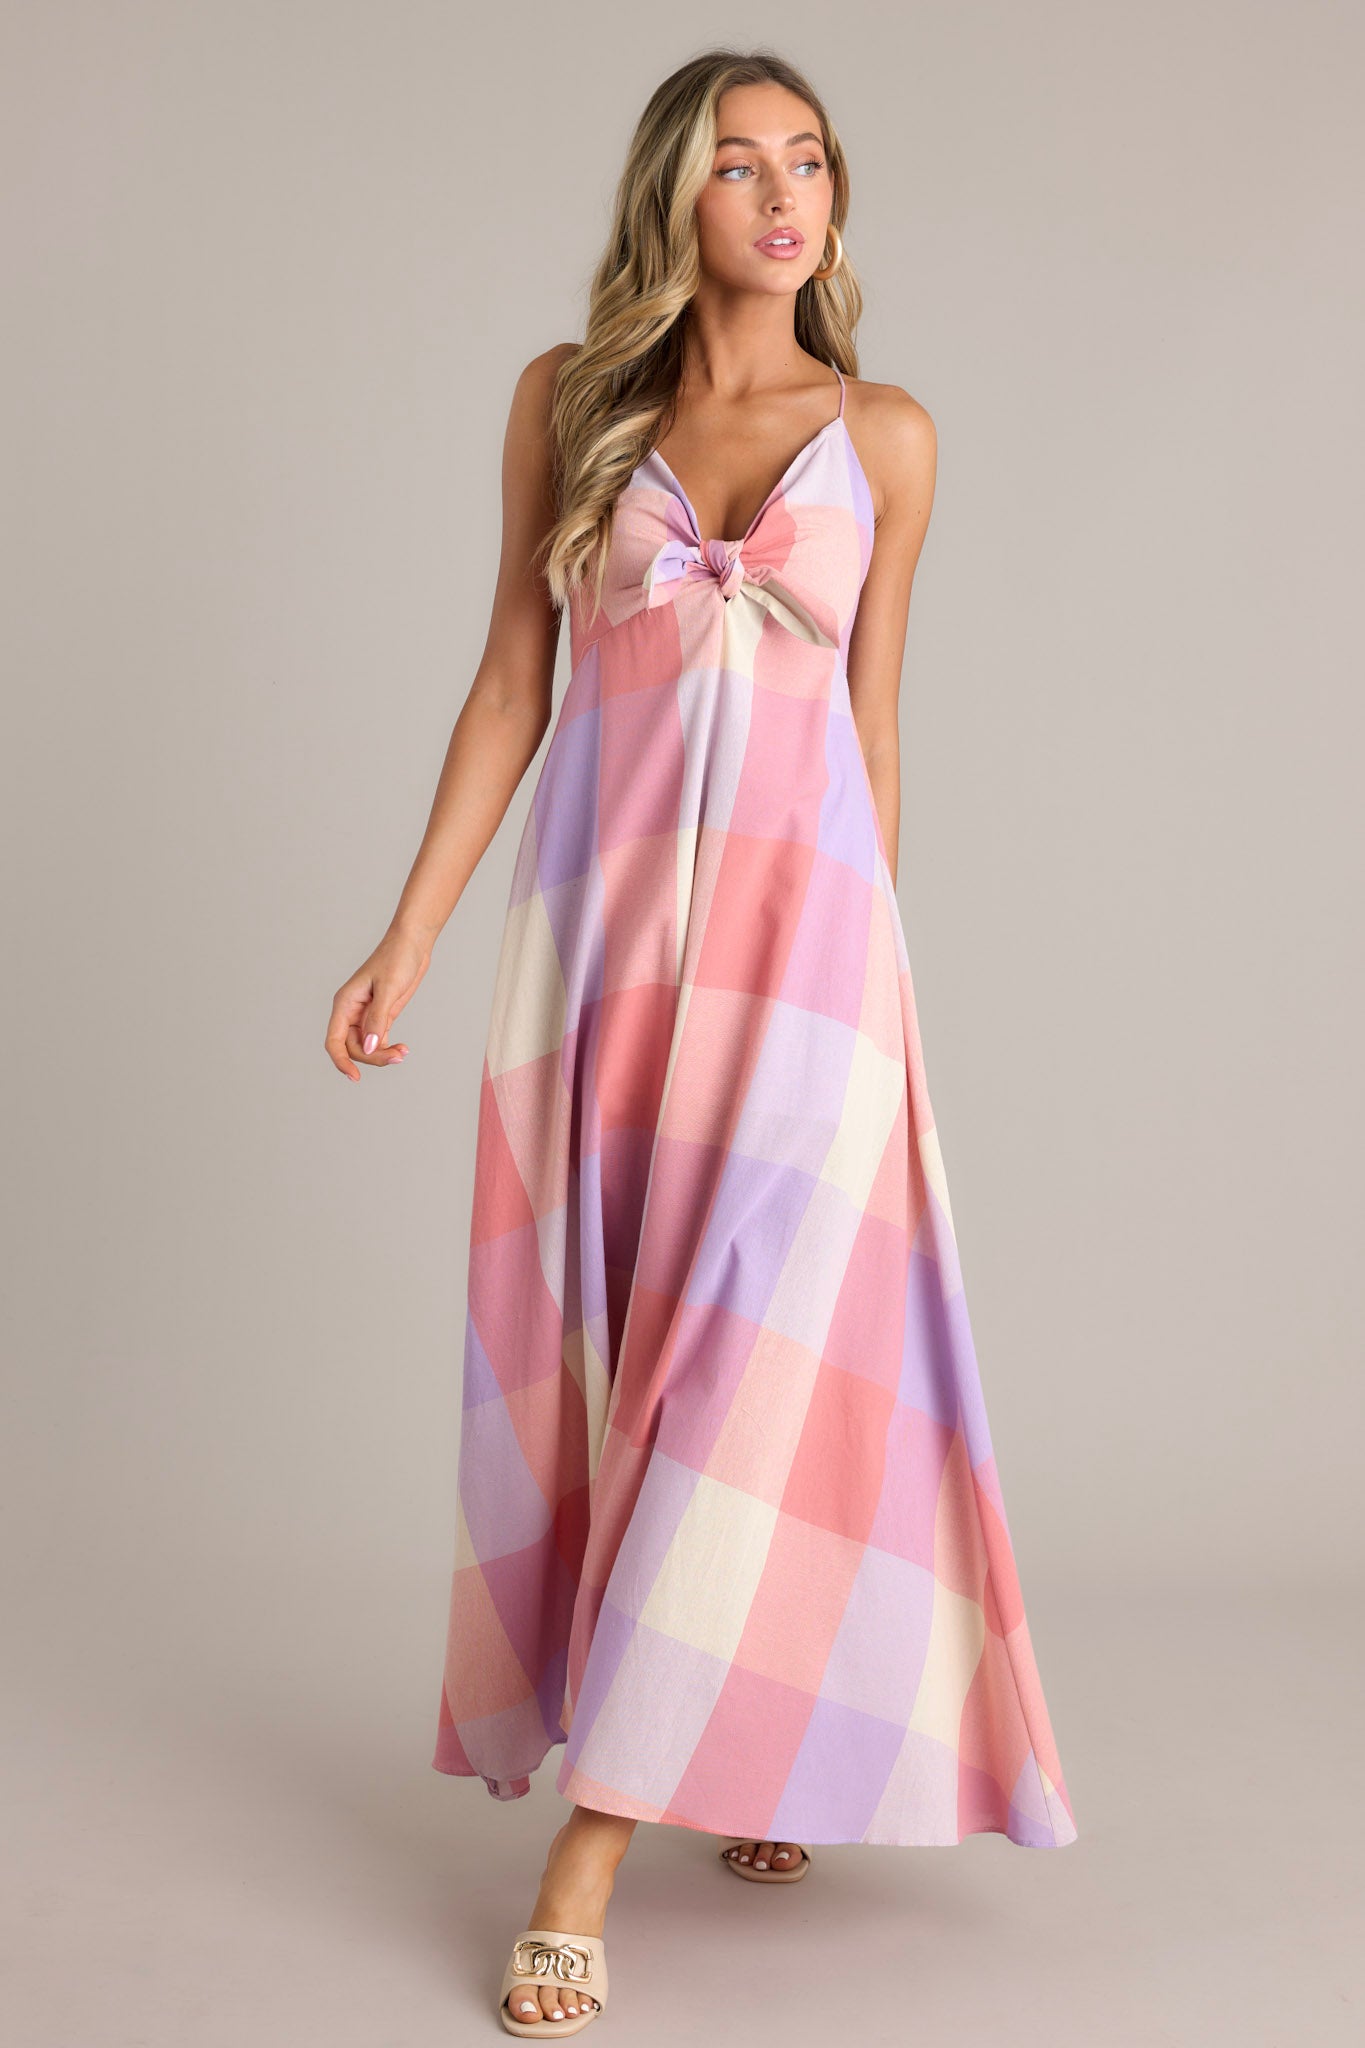 Full length view of a pink maxi dress featuring a v-neckline, a self-tie bust feature, thin self-tie straps that cross in the back, an open back, a discrete back zipper, a large plaid pattern, and a 22.5" front slit